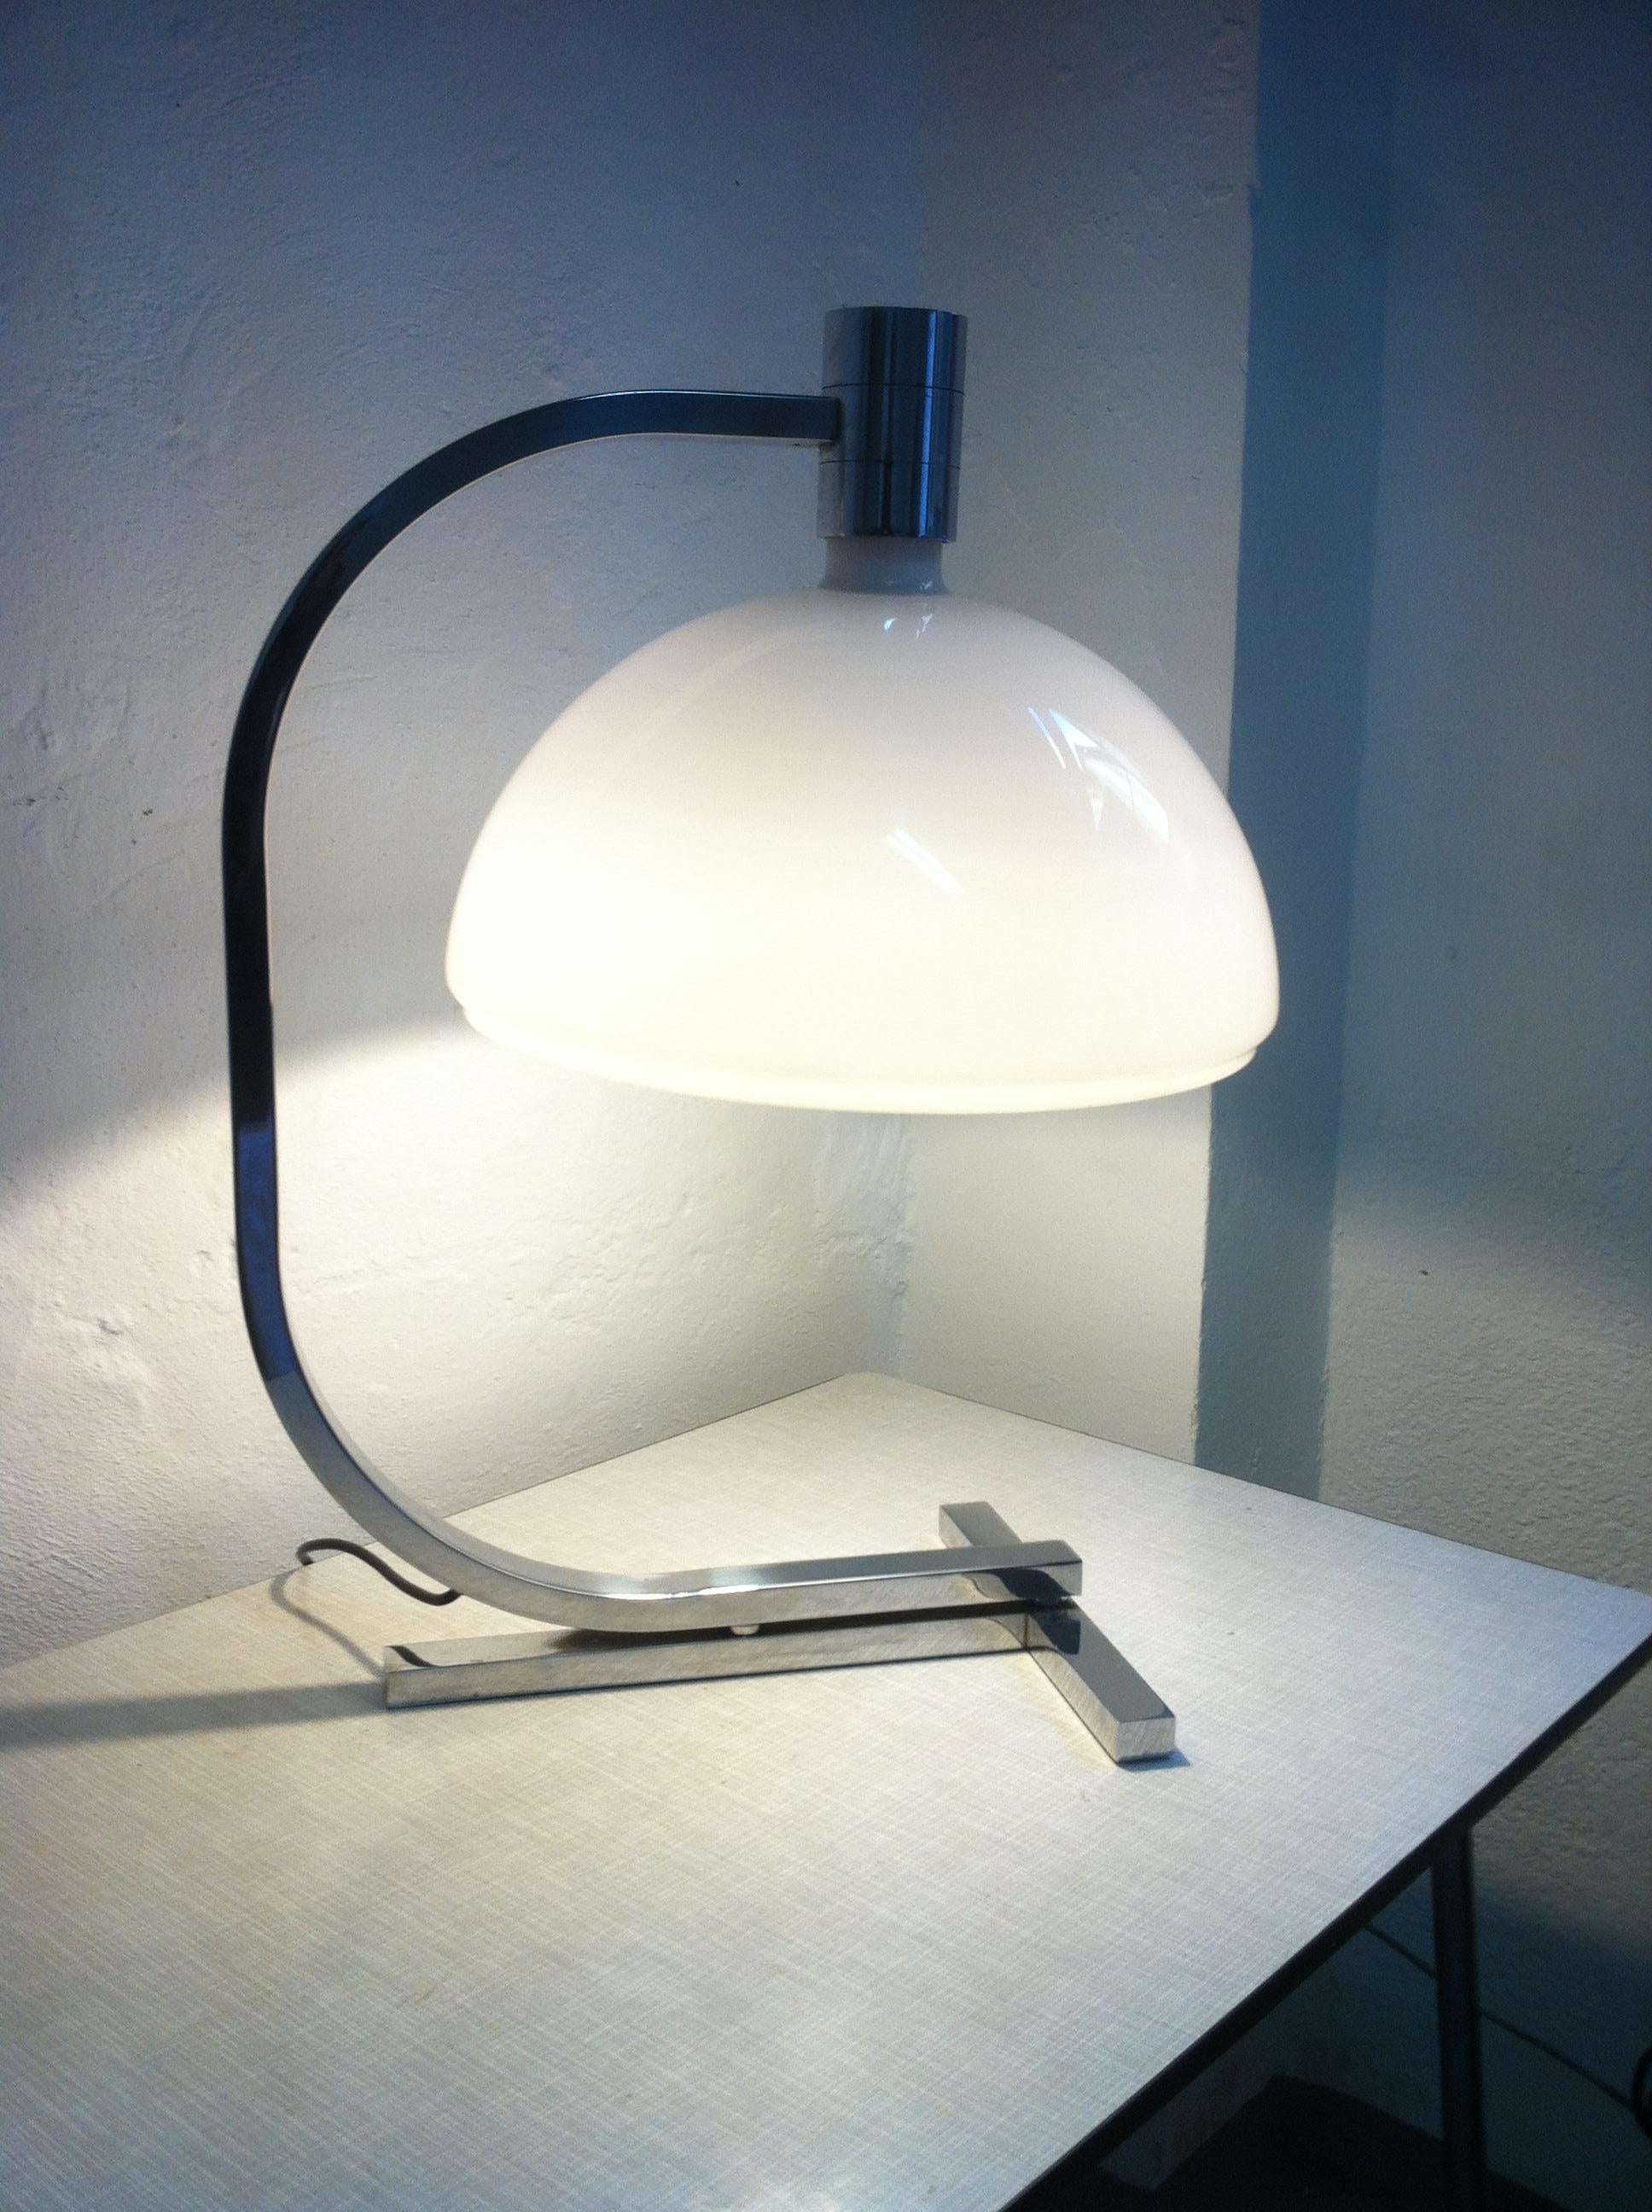 Midcentury AM/AS Table Lamp by Helg, Piva, and Albini for Sirrah Large, 1969 im Angebot 7